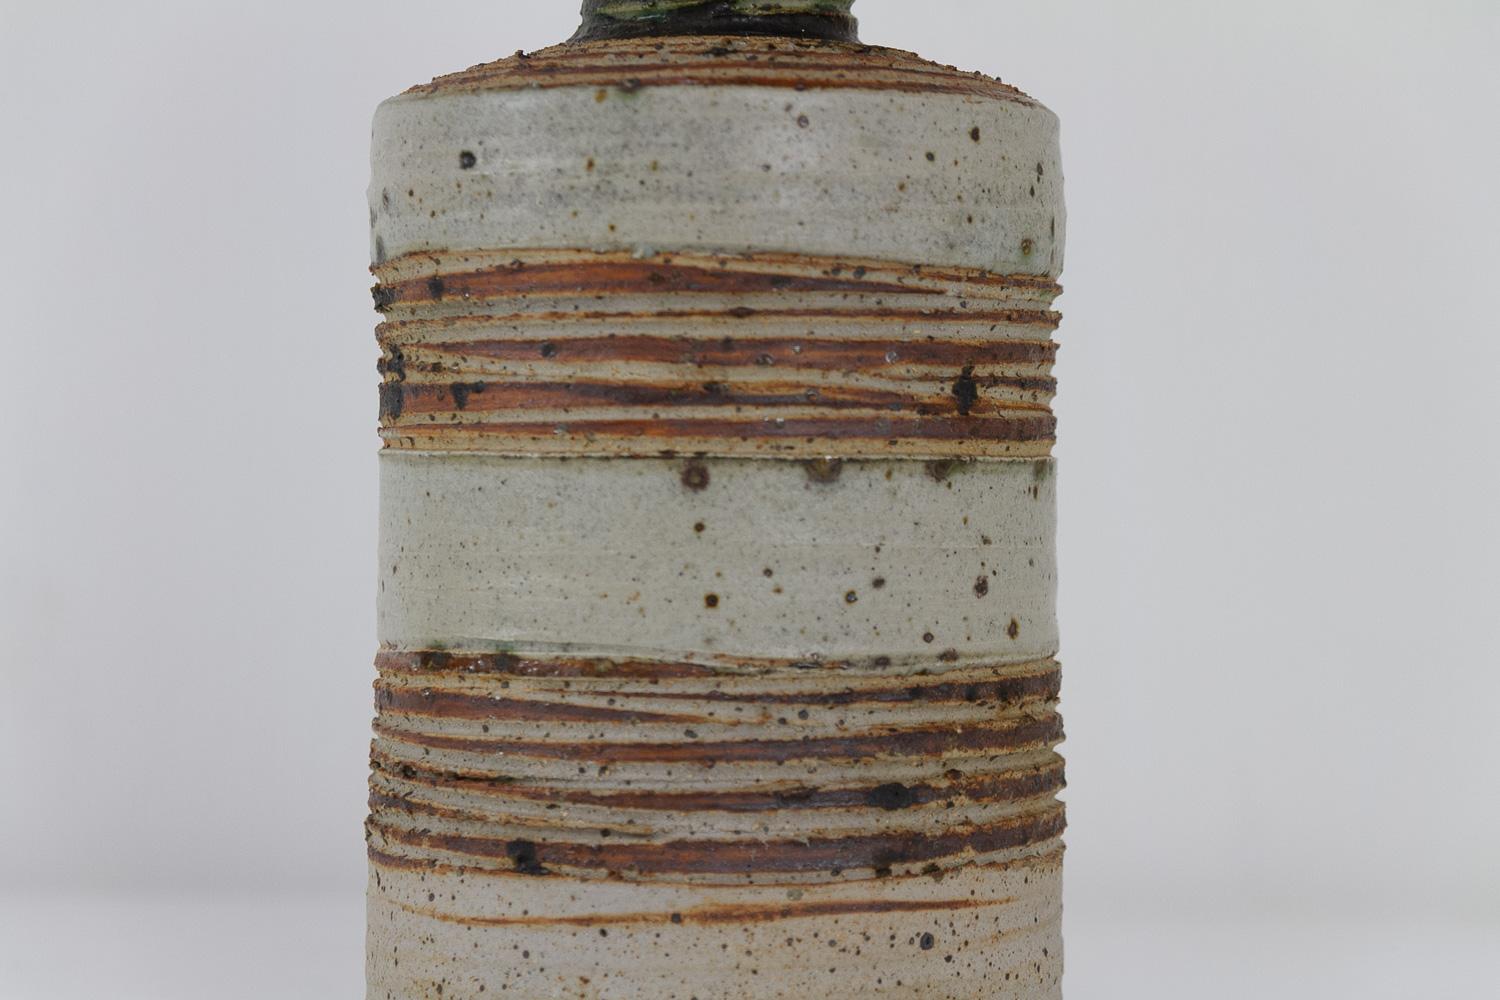 Danish Modern Tue Poulsen Ceramic Table Lamp, 1960s. In Good Condition For Sale In Asaa, DK